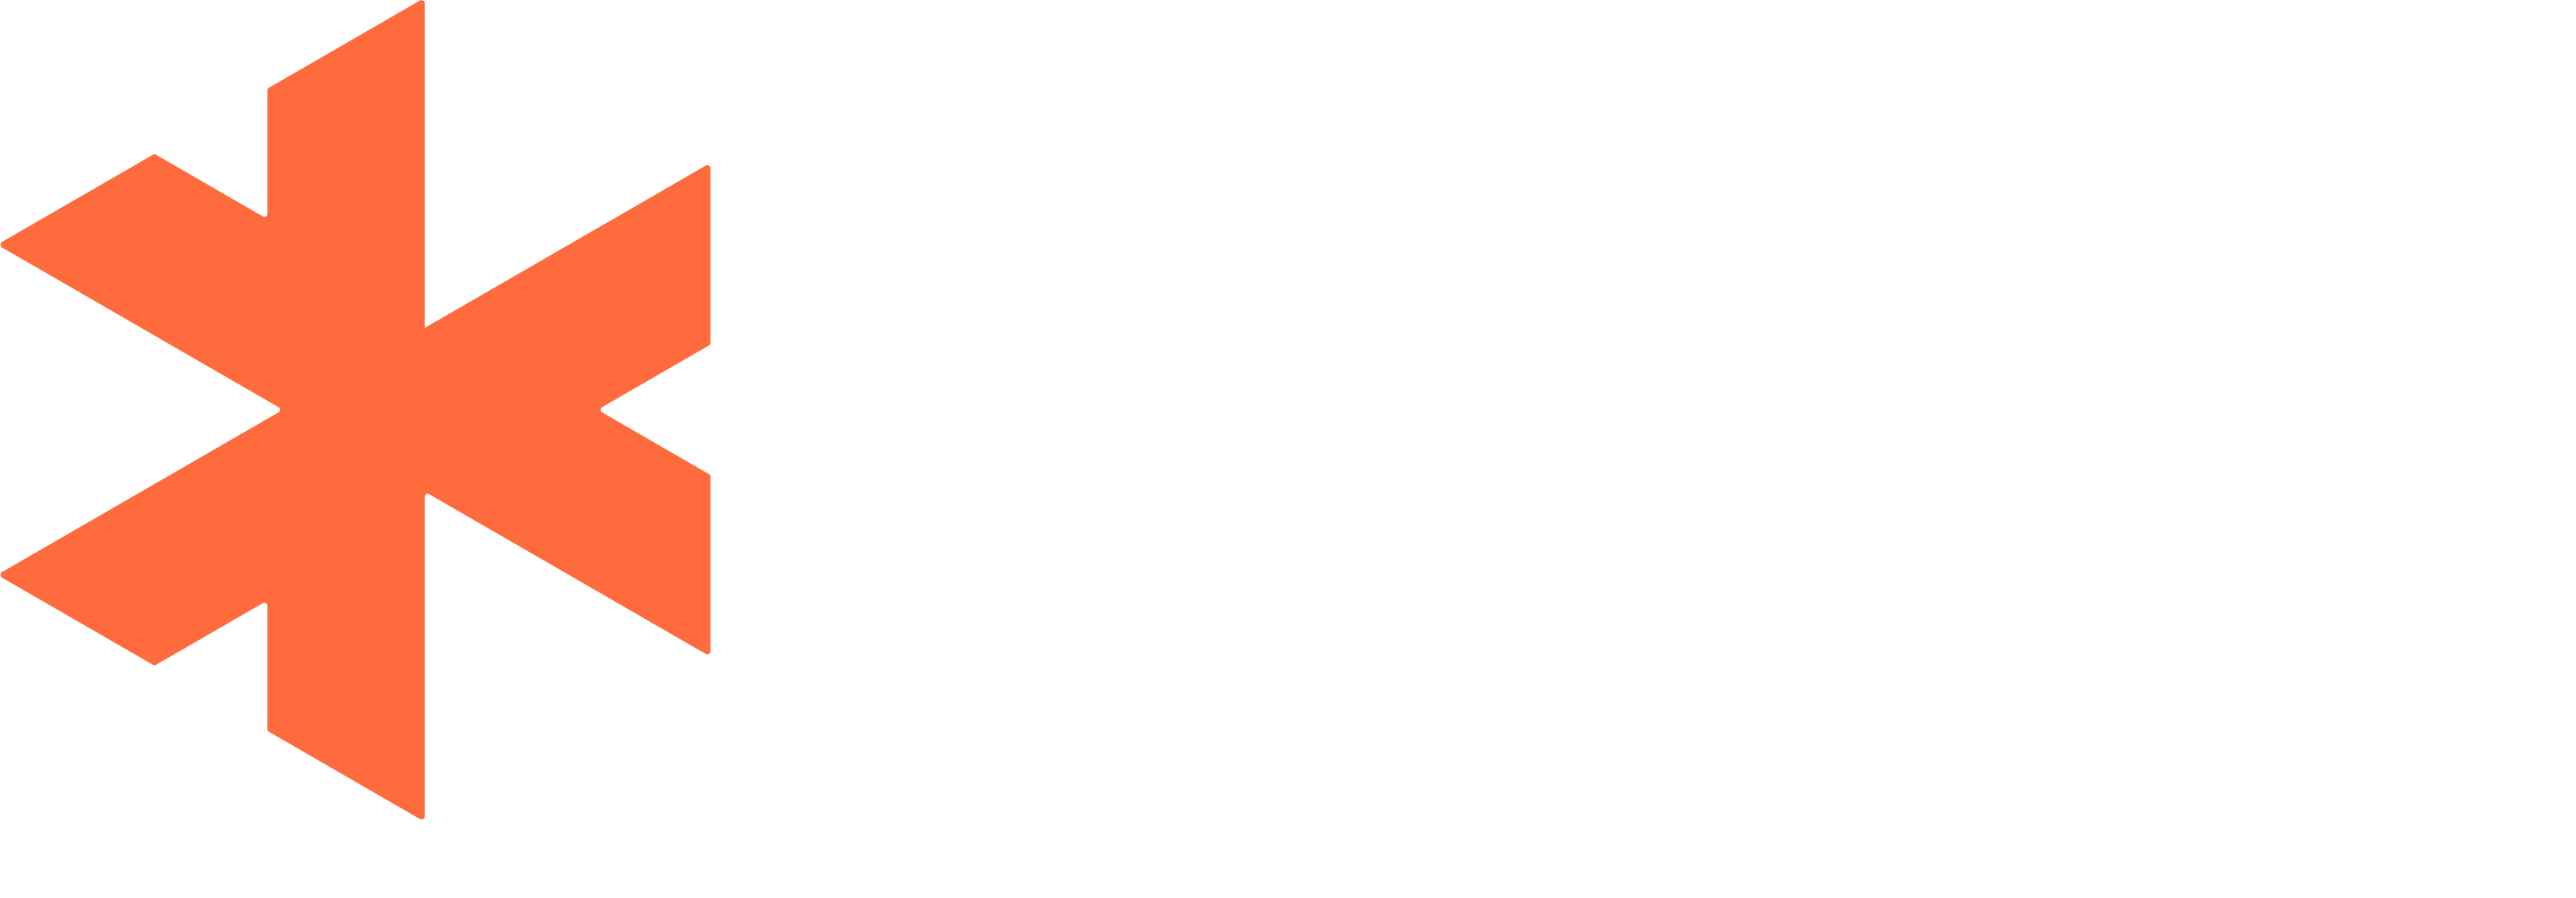 Global Investment Property